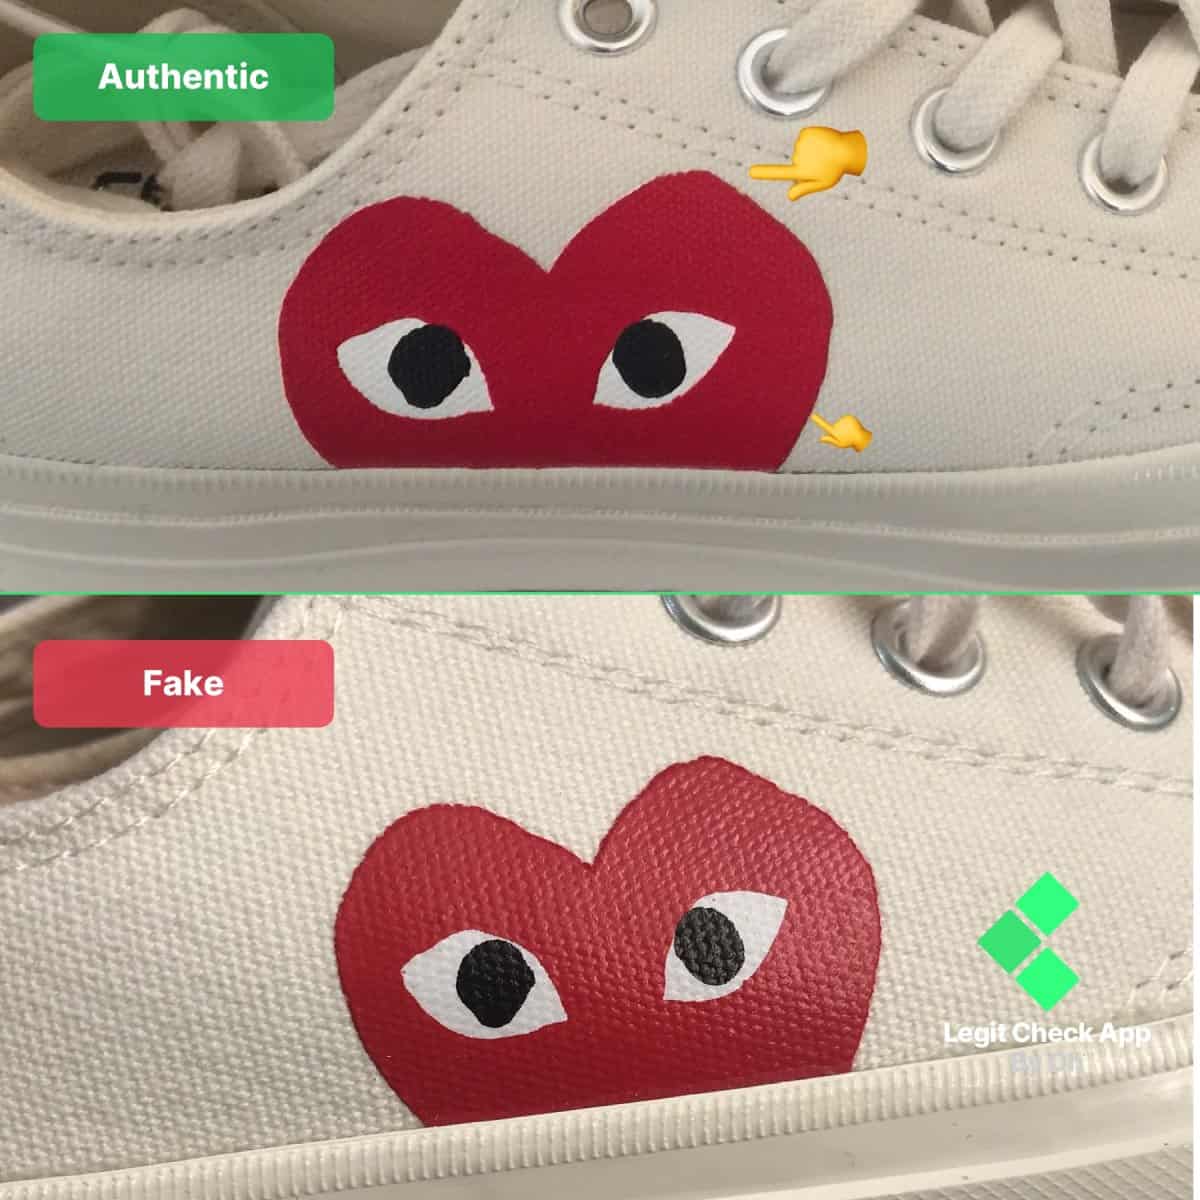 Insulate Slumber Meeting How To Spot Fake Comme Des Garcons CDG Converse - Legit Check By Ch